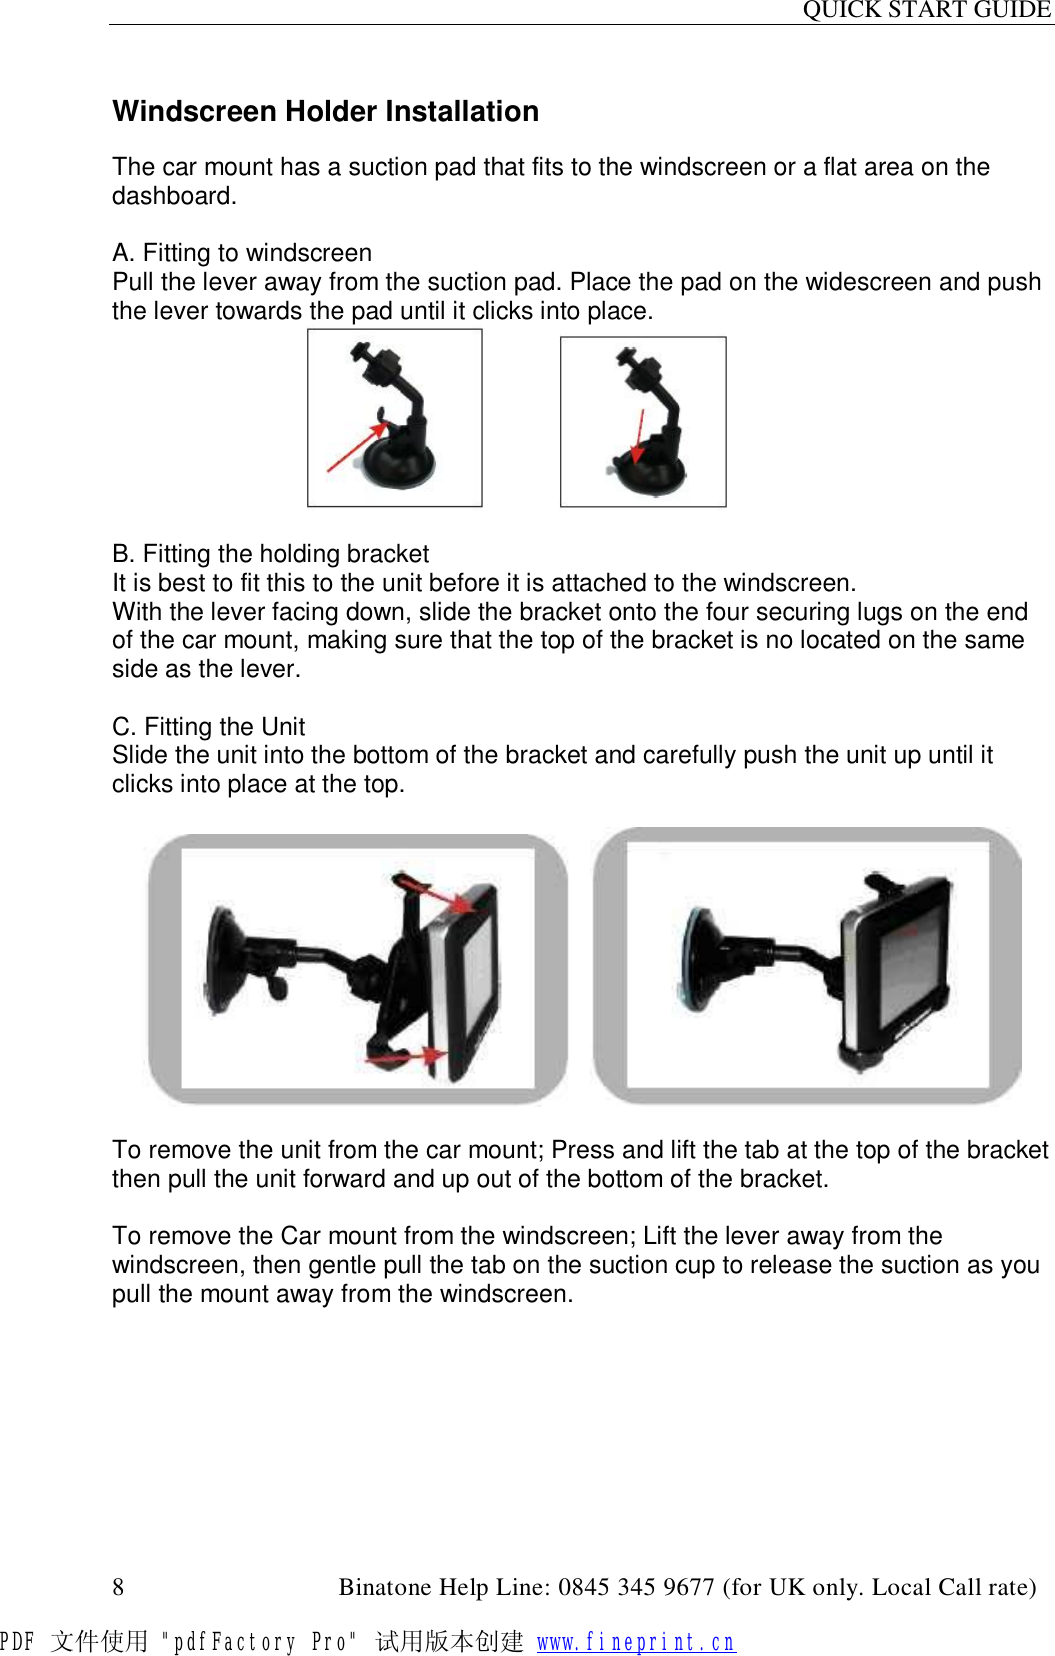 QUICK START GUIDE  8                                         Binatone Help Line: 0845 345 9677 (for UK only. Local Call rate)  Windscreen Holder Installation  The car mount has a suction pad that fits to the windscreen or a flat area on the dashboard.  A. Fitting to windscreen Pull the lever away from the suction pad. Place the pad on the widescreen and push the lever towards the pad until it clicks into place.                                            B. Fitting the holding bracket It is best to fit this to the unit before it is attached to the windscreen. With the lever facing down, slide the bracket onto the four securing lugs on the end of the car mount, making sure that the top of the bracket is no located on the same side as the lever.                                           C. Fitting the Unit Slide the unit into the bottom of the bracket and carefully push the unit up until it clicks into place at the top.        To remove the unit from the car mount; Press and lift the tab at the top of the bracket then pull the unit forward and up out of the bottom of the bracket.  To remove the Car mount from the windscreen; Lift the lever away from the windscreen, then gentle pull the tab on the suction cup to release the suction as you pull the mount away from the windscreen. PDF 文件使用 &quot;pdfFactory Pro&quot; 试用版本创建 www.fineprint.cn